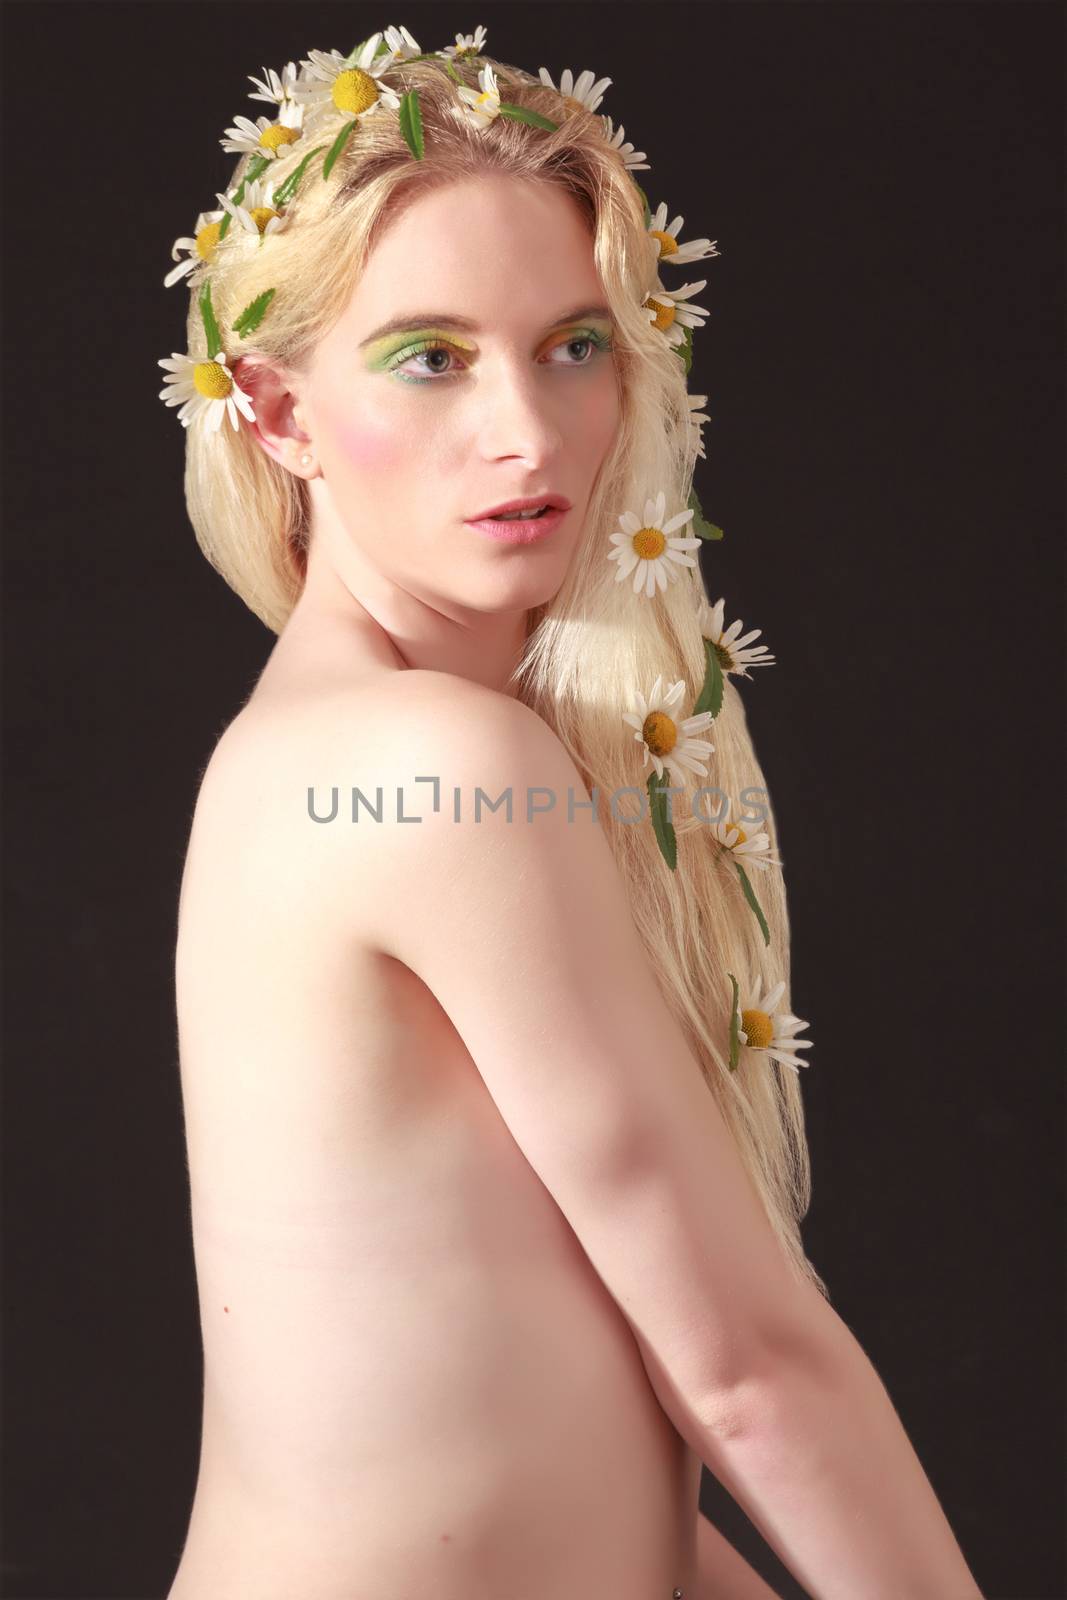 Naked Pretty Woman with Flowers on her Blond Hair by STphotography